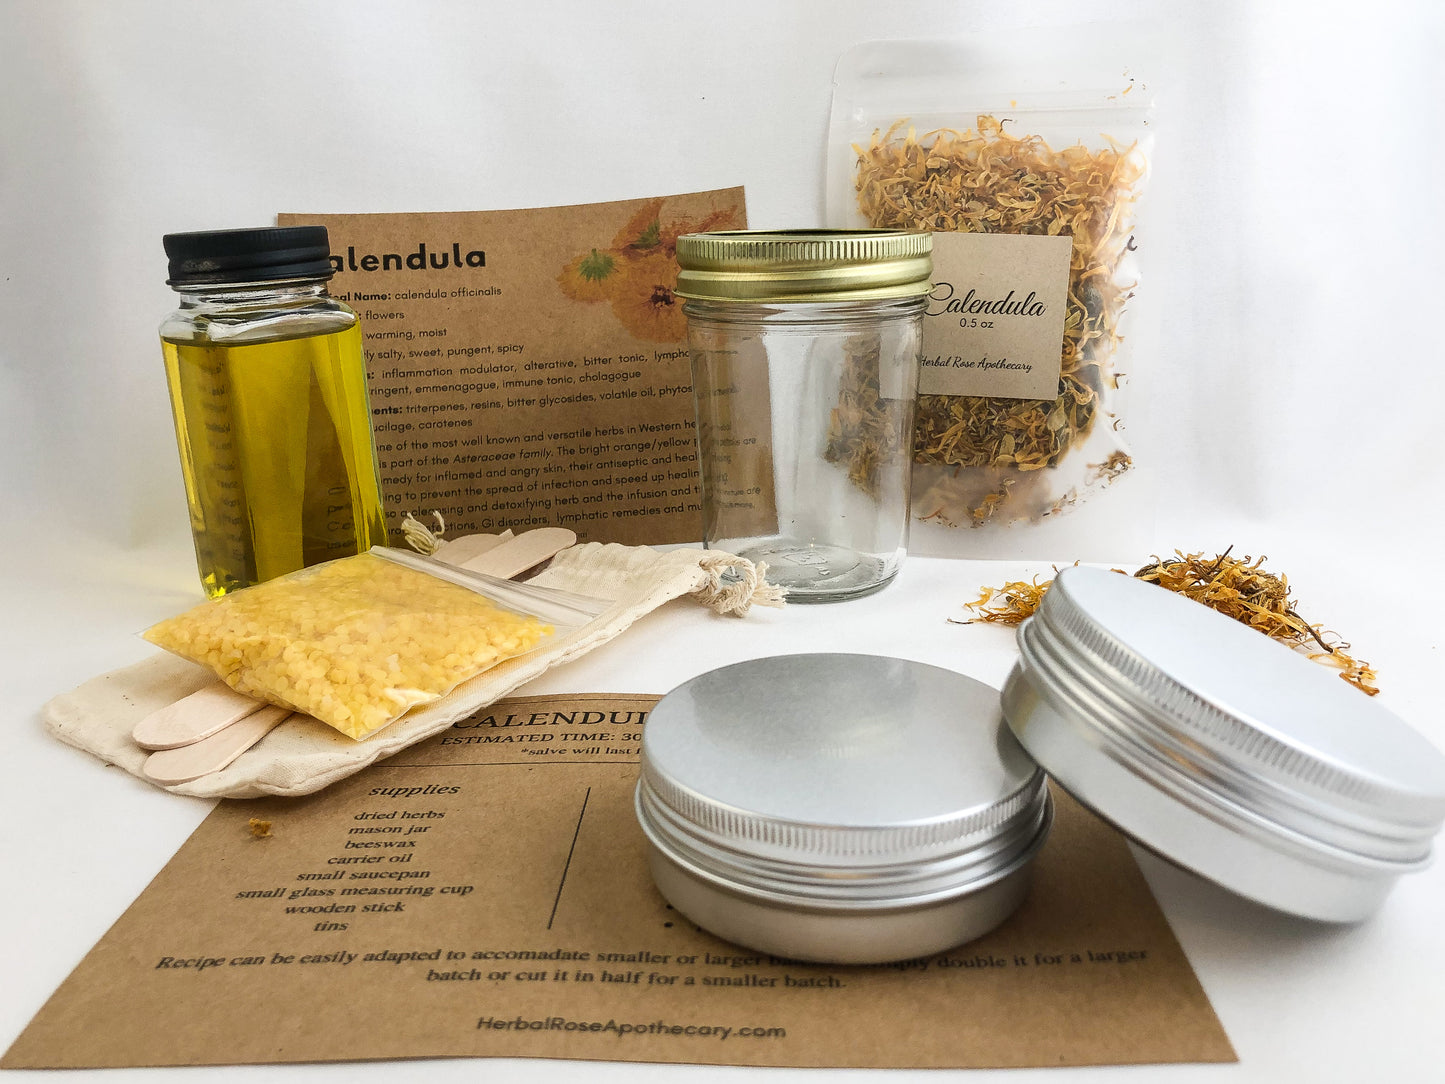 calendula salve kit with white background. Kit includes 2 metal tins, dried calendula, muslin bag, beeswax, 2 tongue depressors, carrier oil, mason jar, monograph, and directions